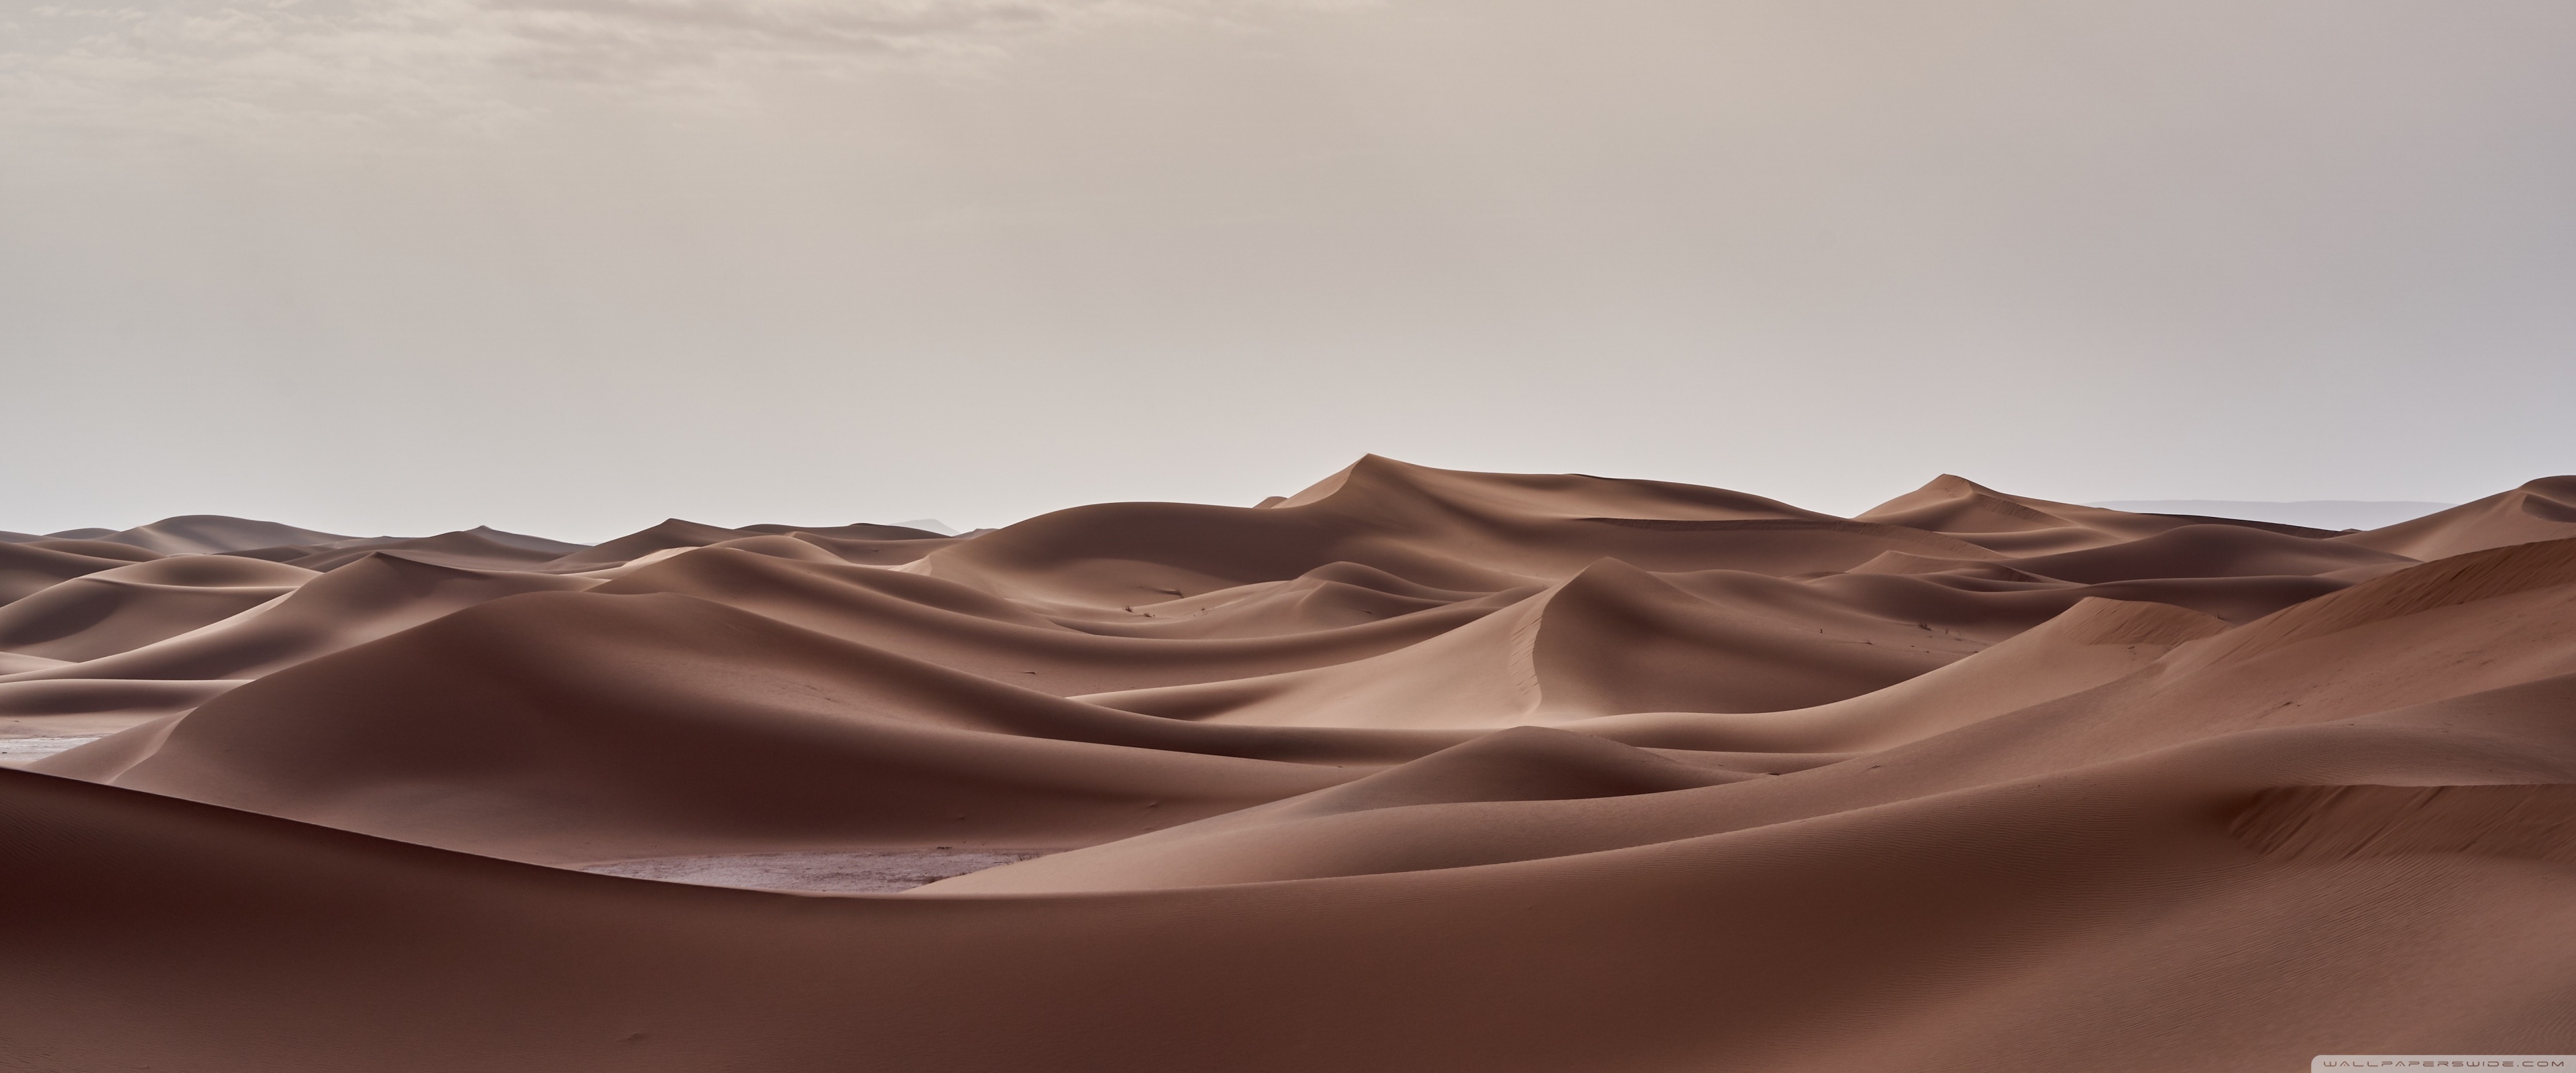 macos - Get the Mojave dynamic wallpaper back after upgrading to Big Sur -  Ask Different